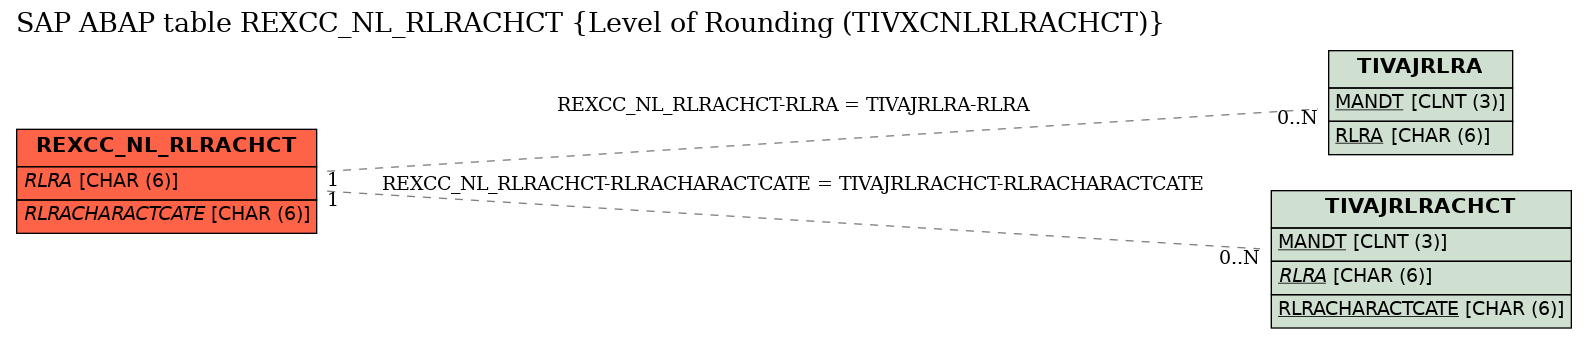 E-R Diagram for table REXCC_NL_RLRACHCT (Level of Rounding (TIVXCNLRLRACHCT))